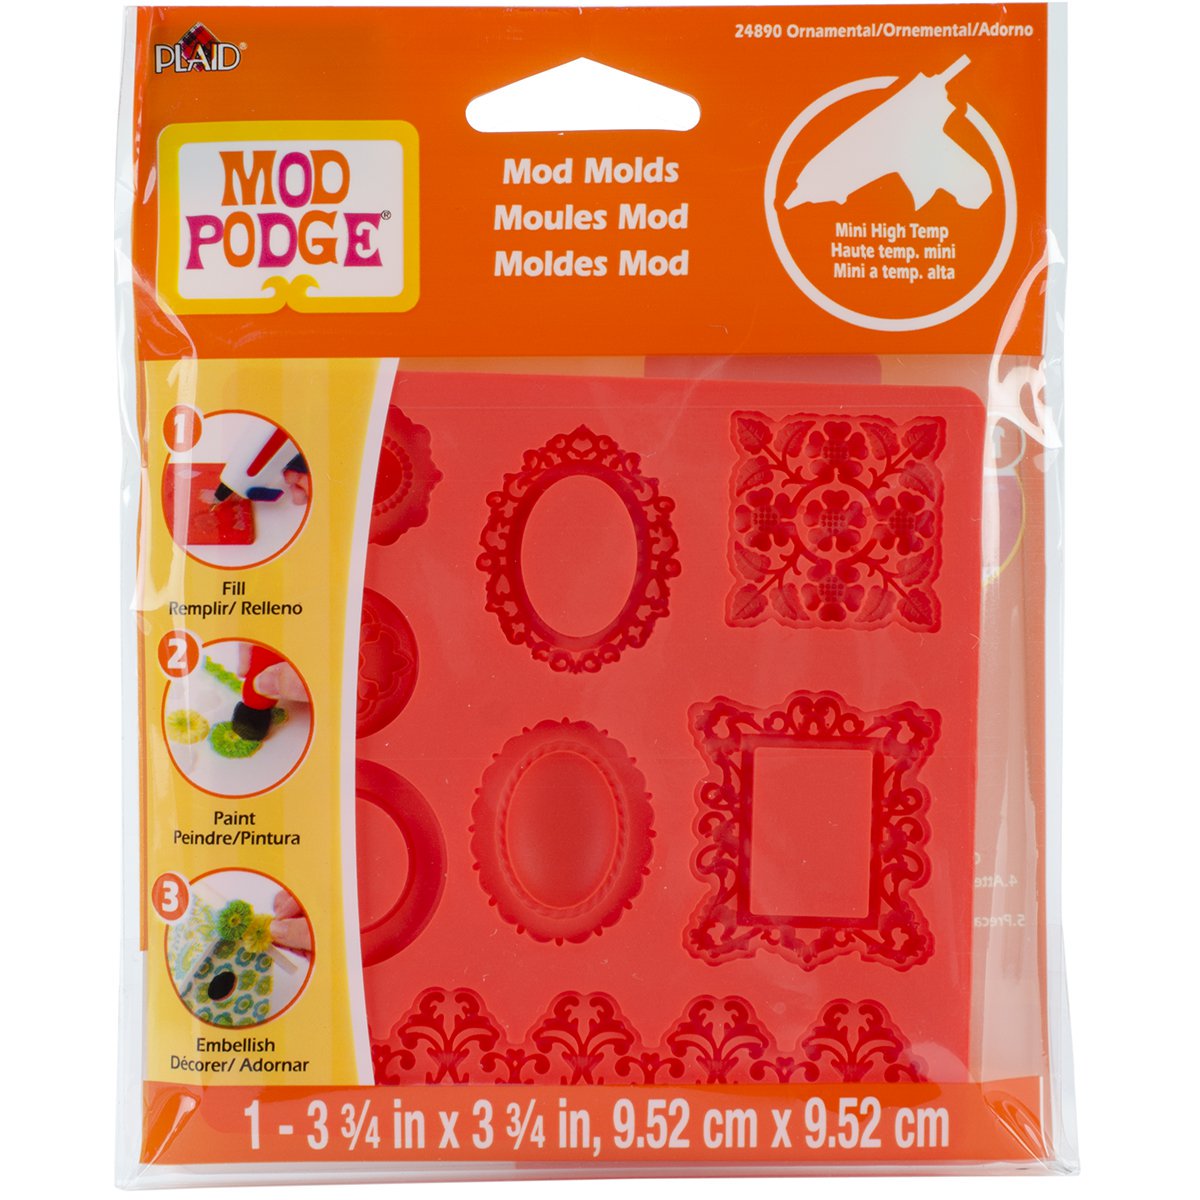 Mod Podge Silicone Mod Molds - Assorted Designs